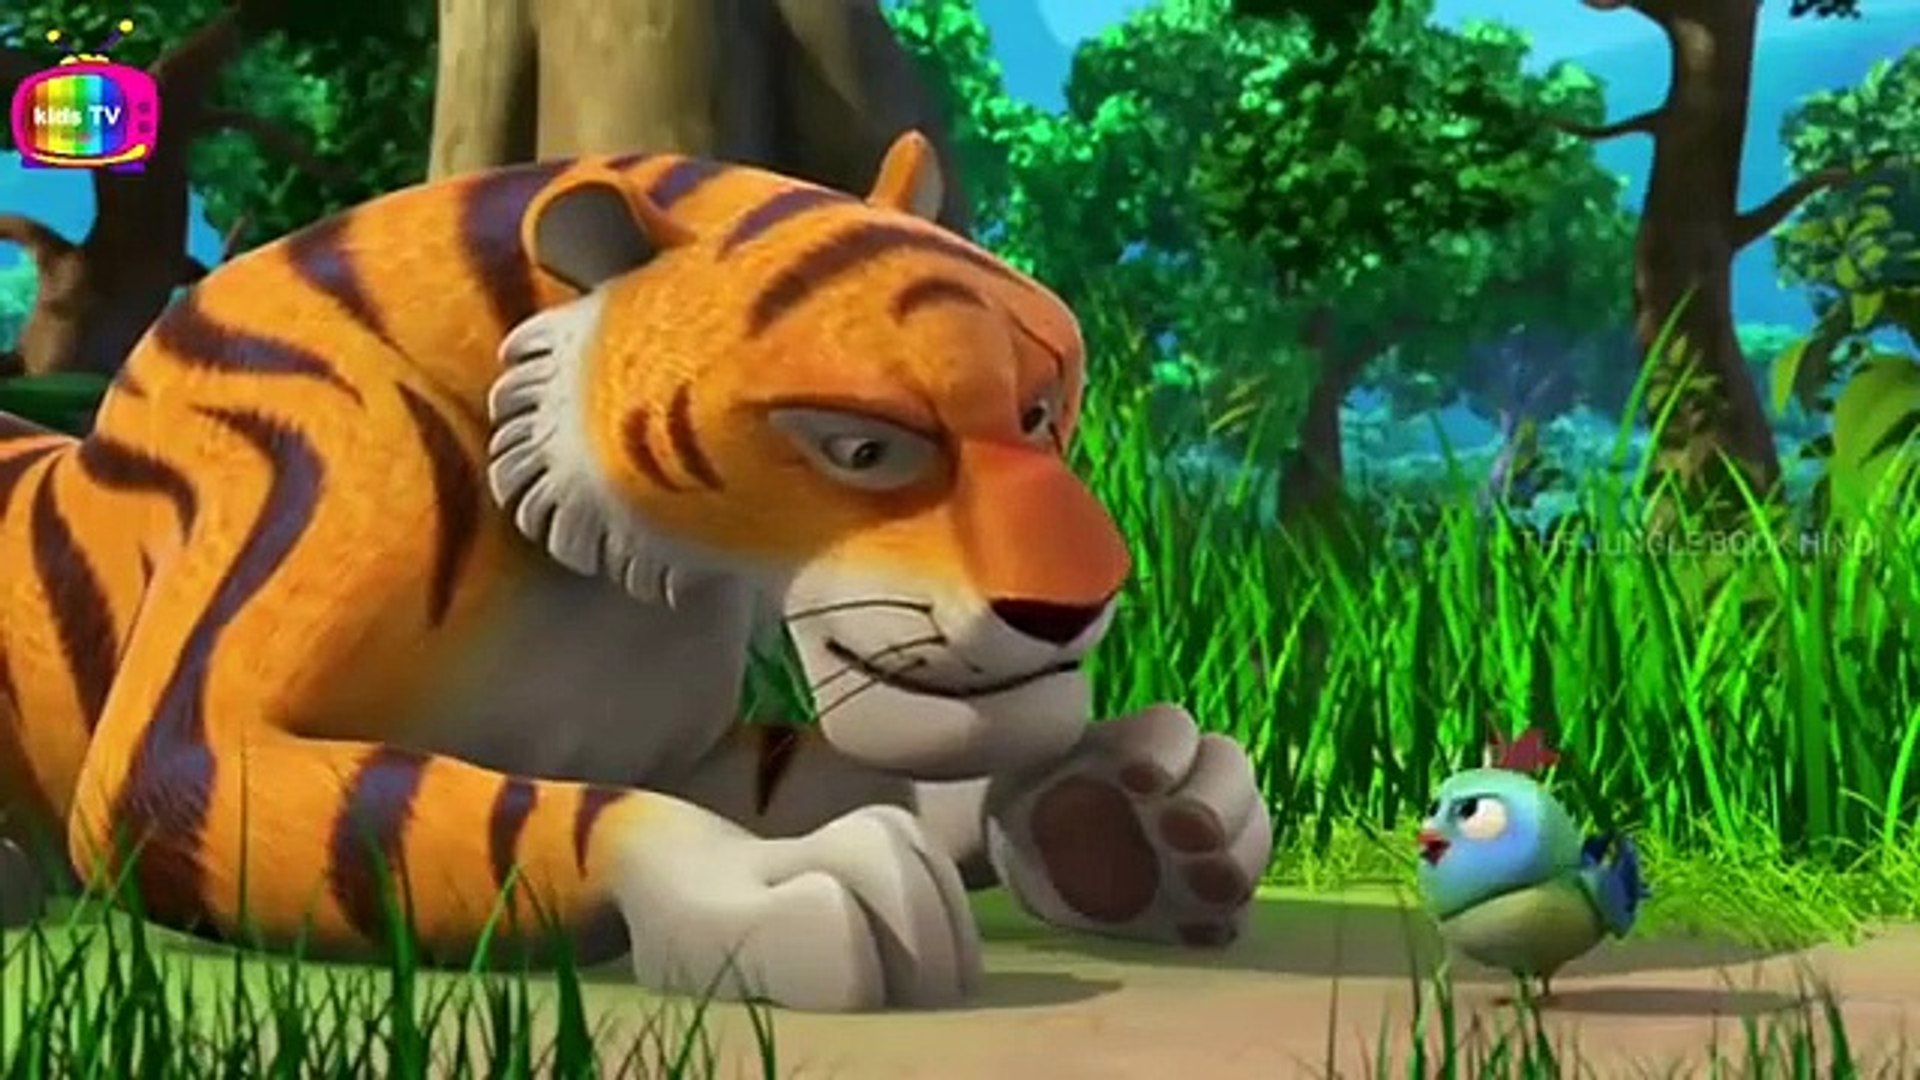 The Jungle book season 3 new episode_ DADDY SHER KHAN_ Mogli cartoon new  episode Jungle book story - video Dailymotion